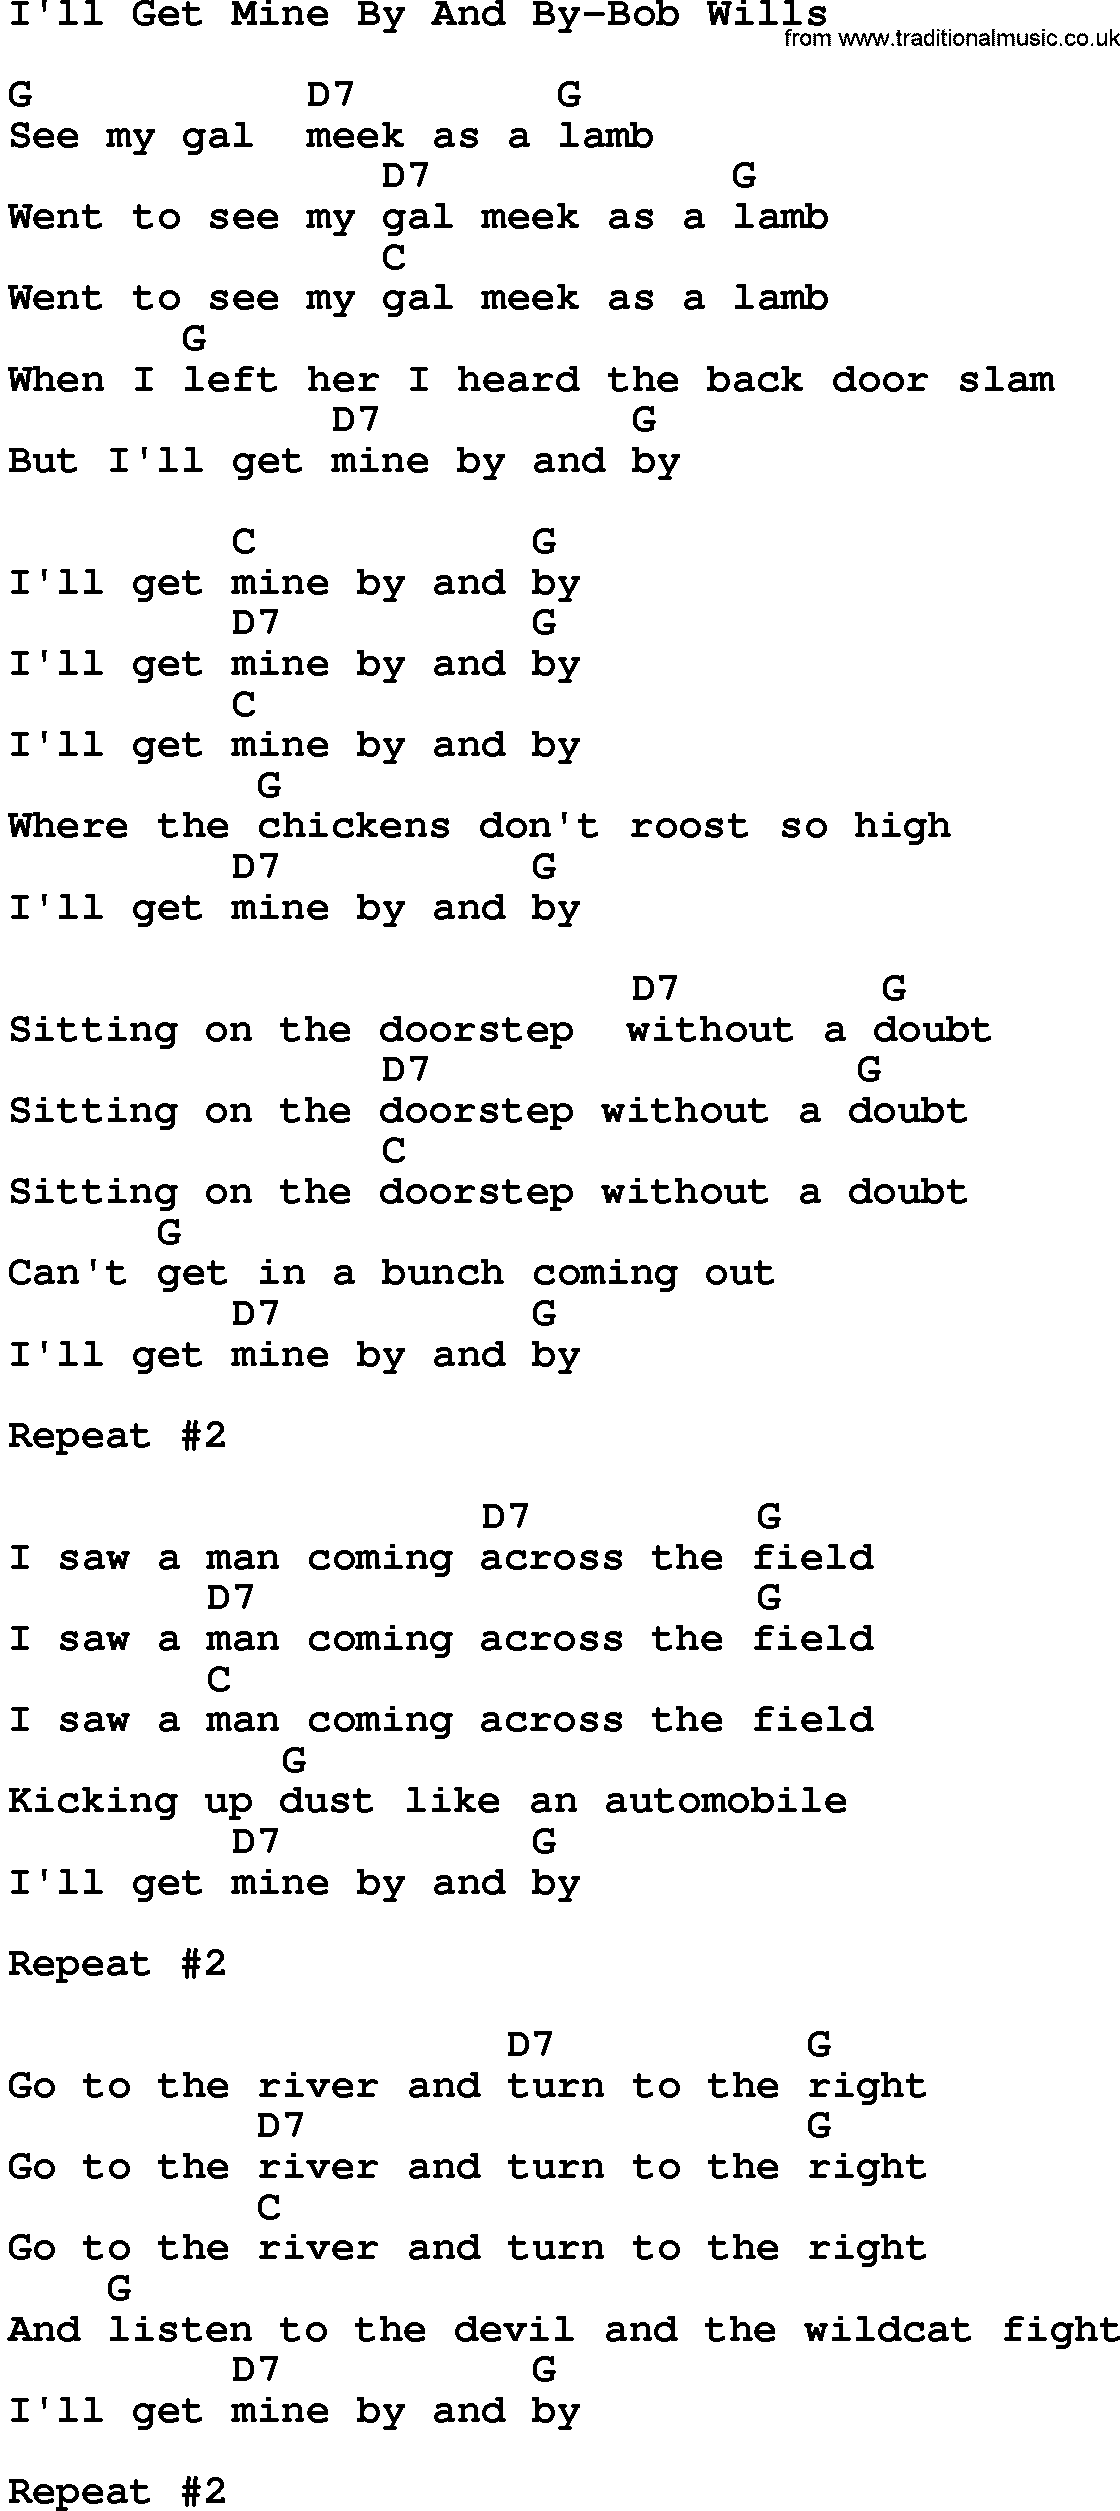 Country music song: I'll Get Mine By And By-Bob Wills lyrics and chords